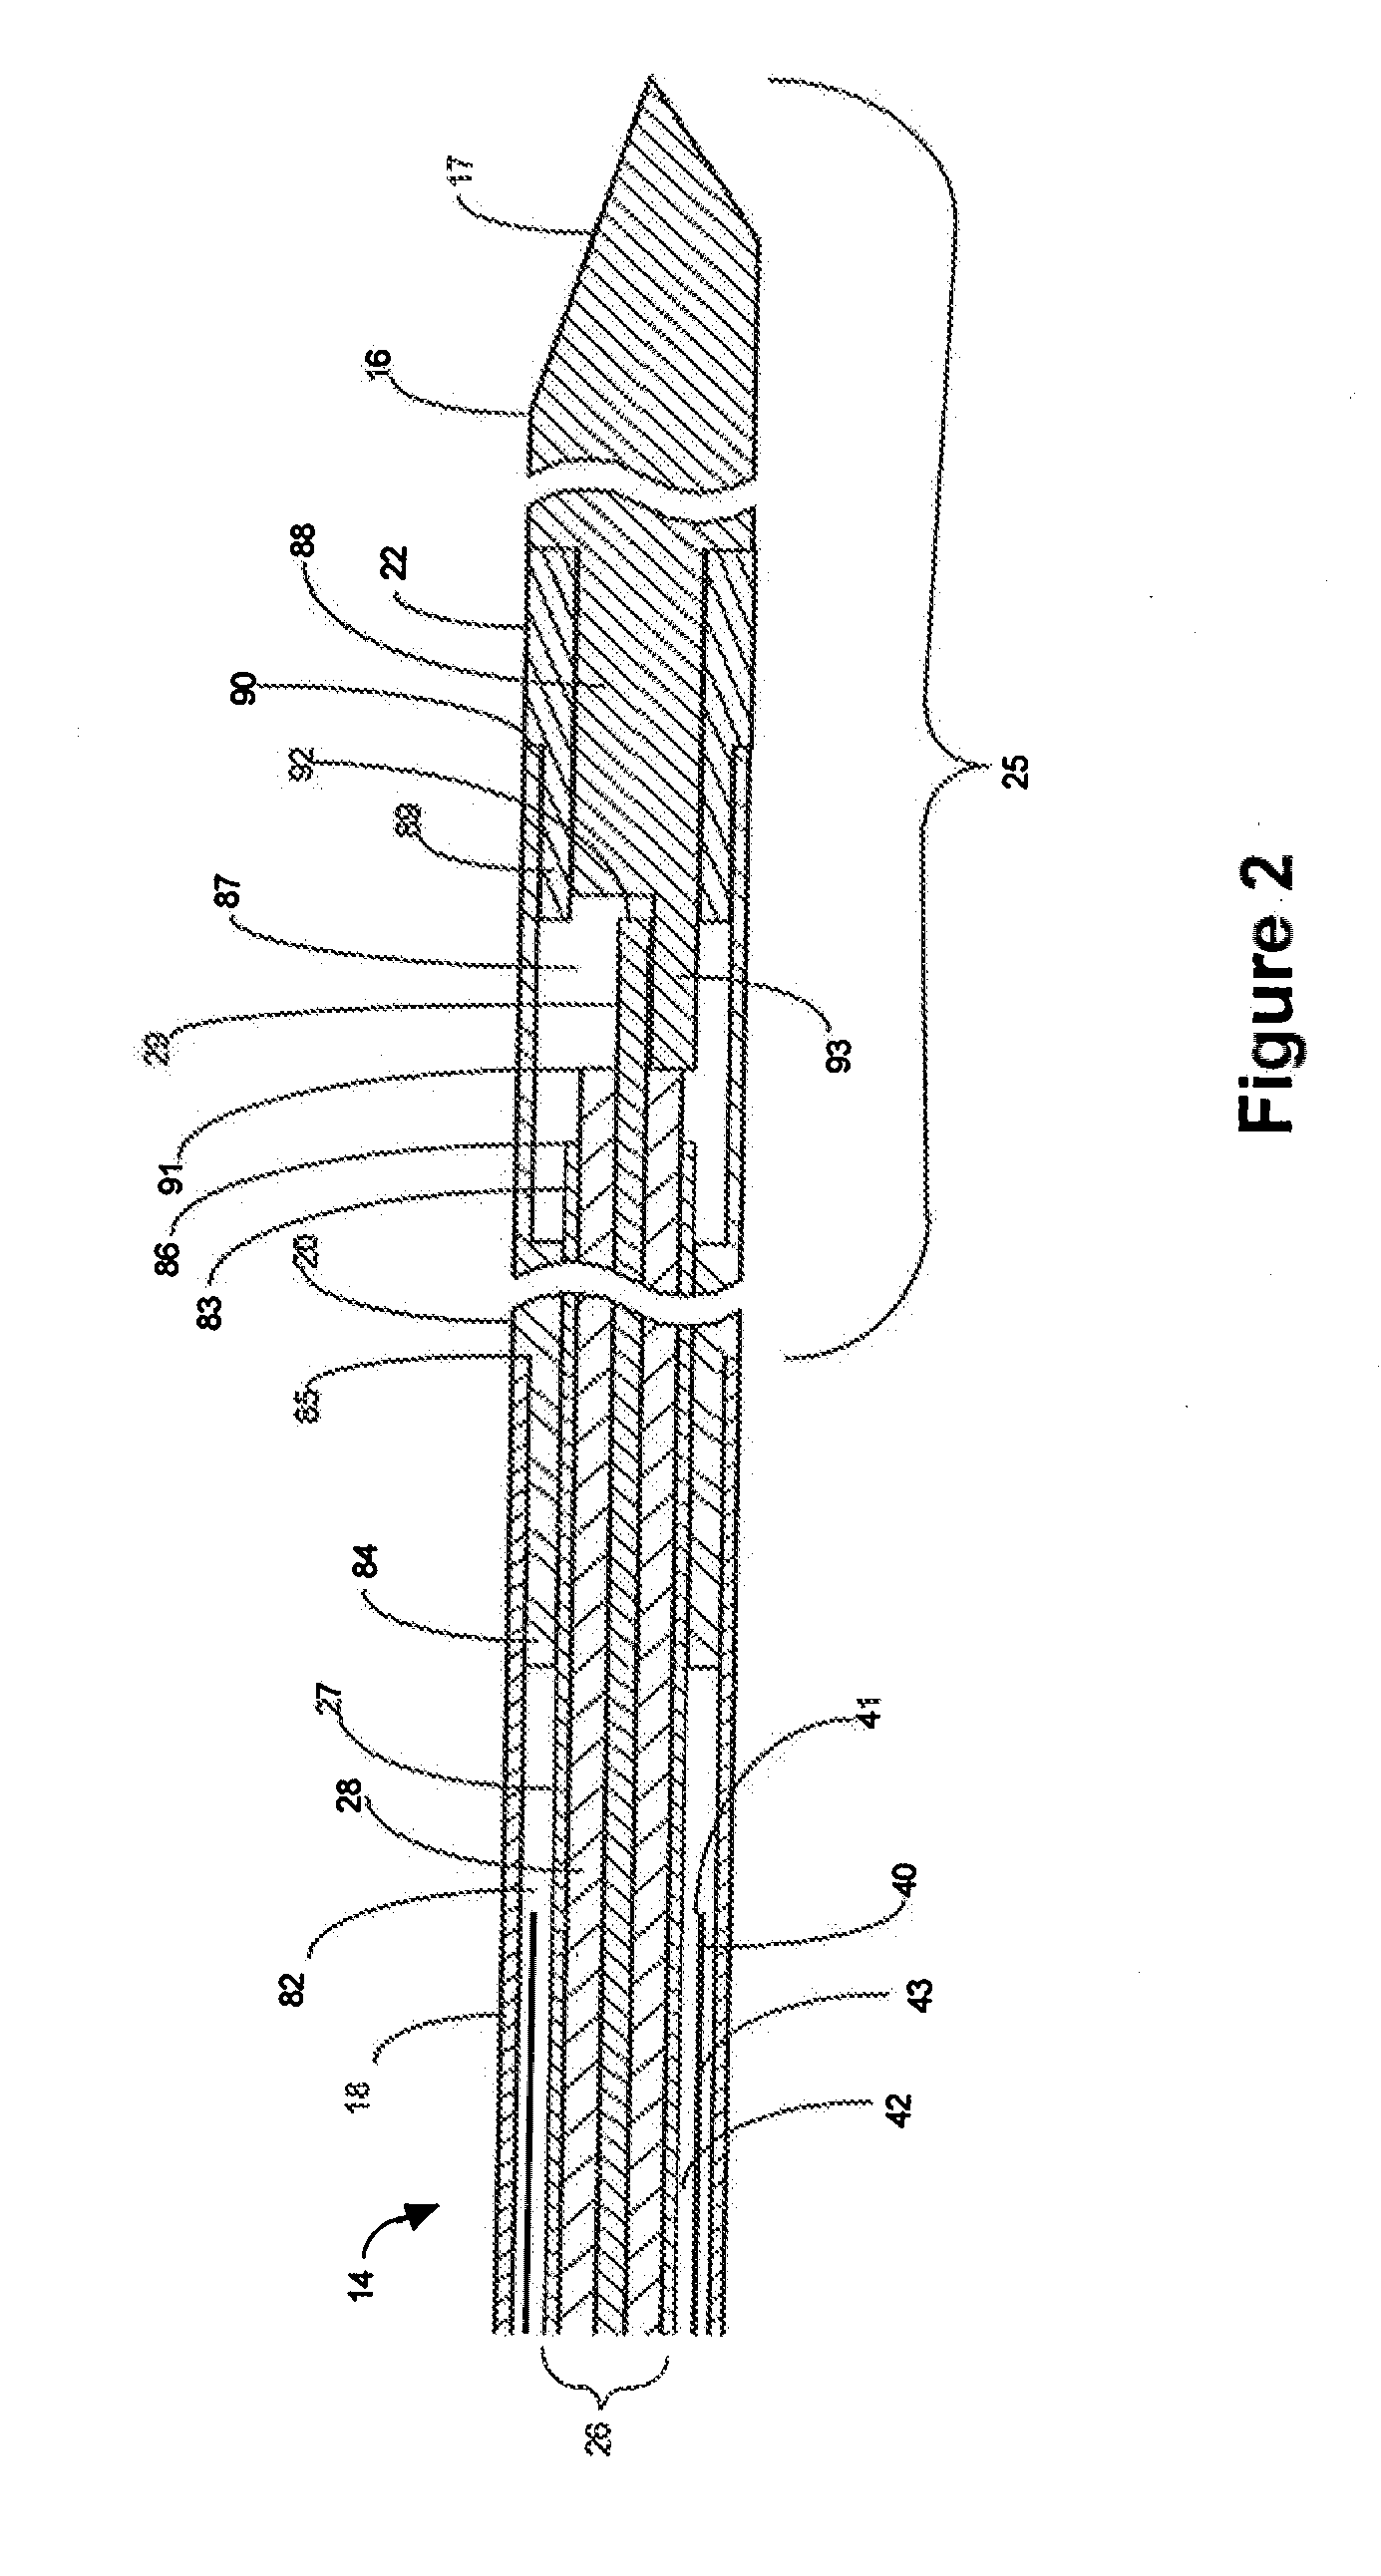 Microwave coagulation applicator and system